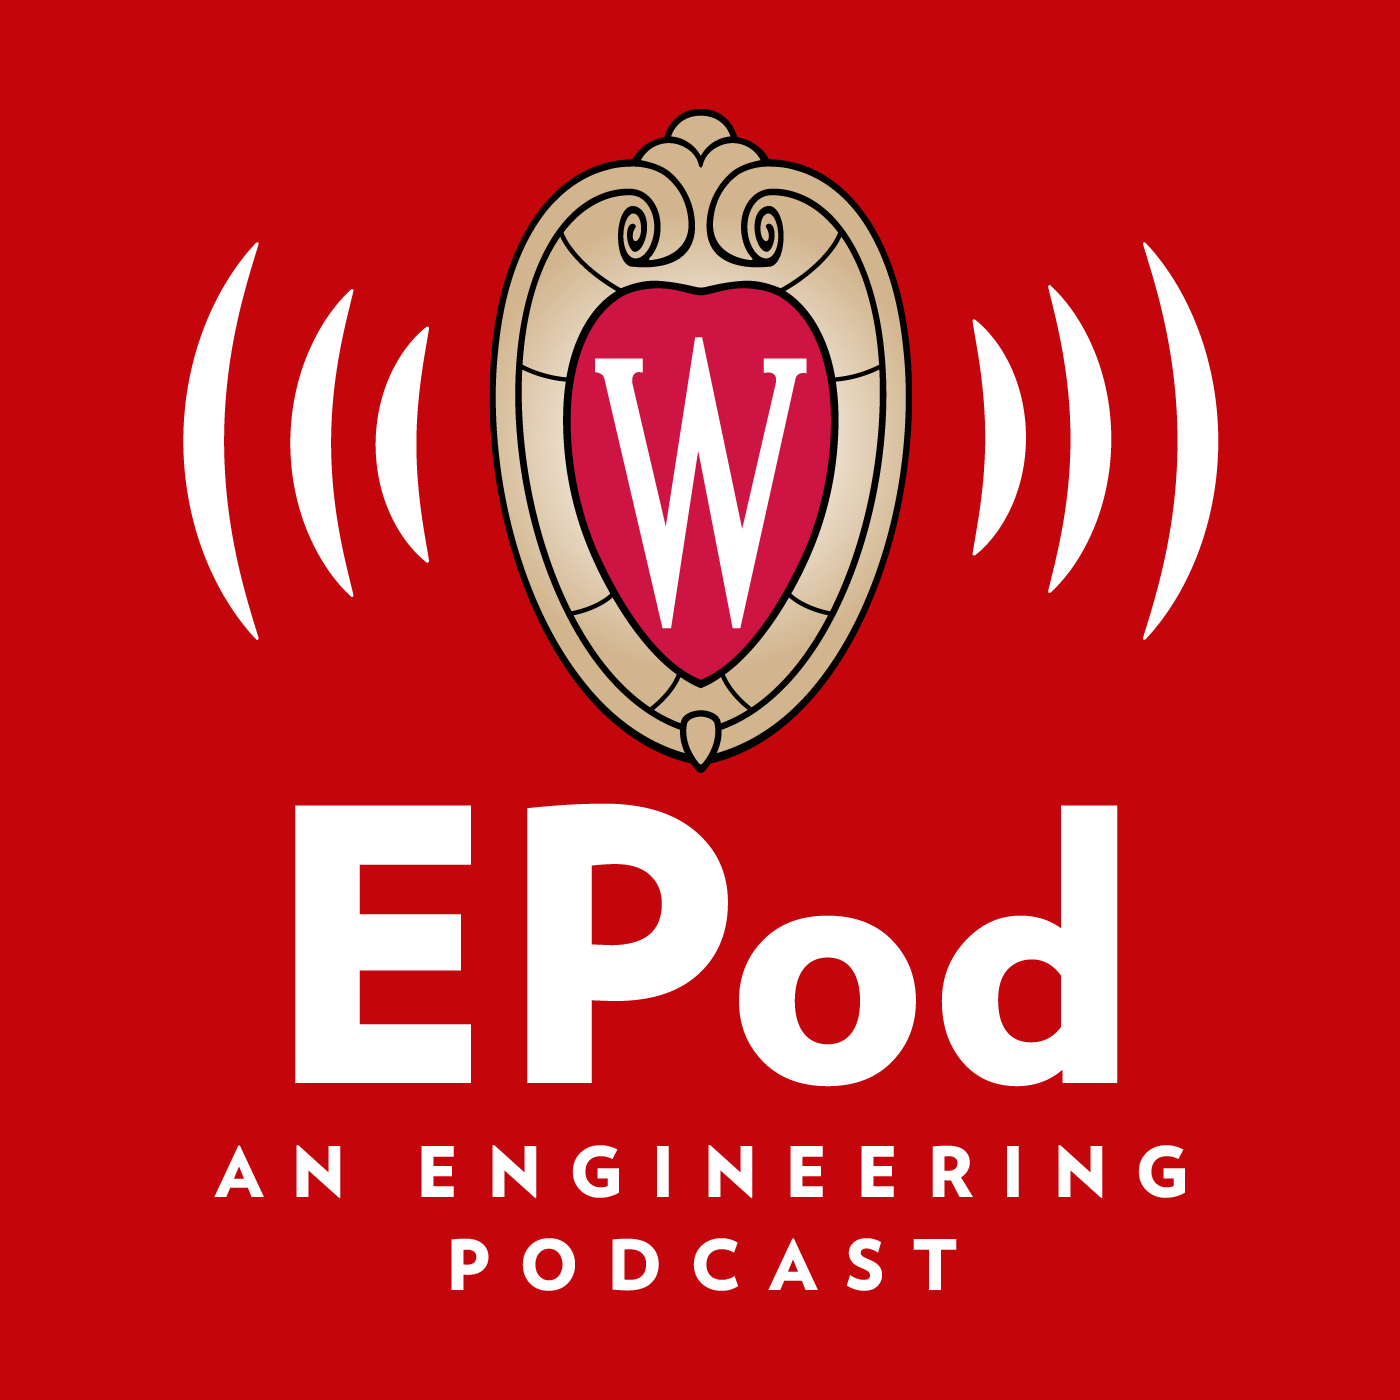 EPod: An Engineering Podcast